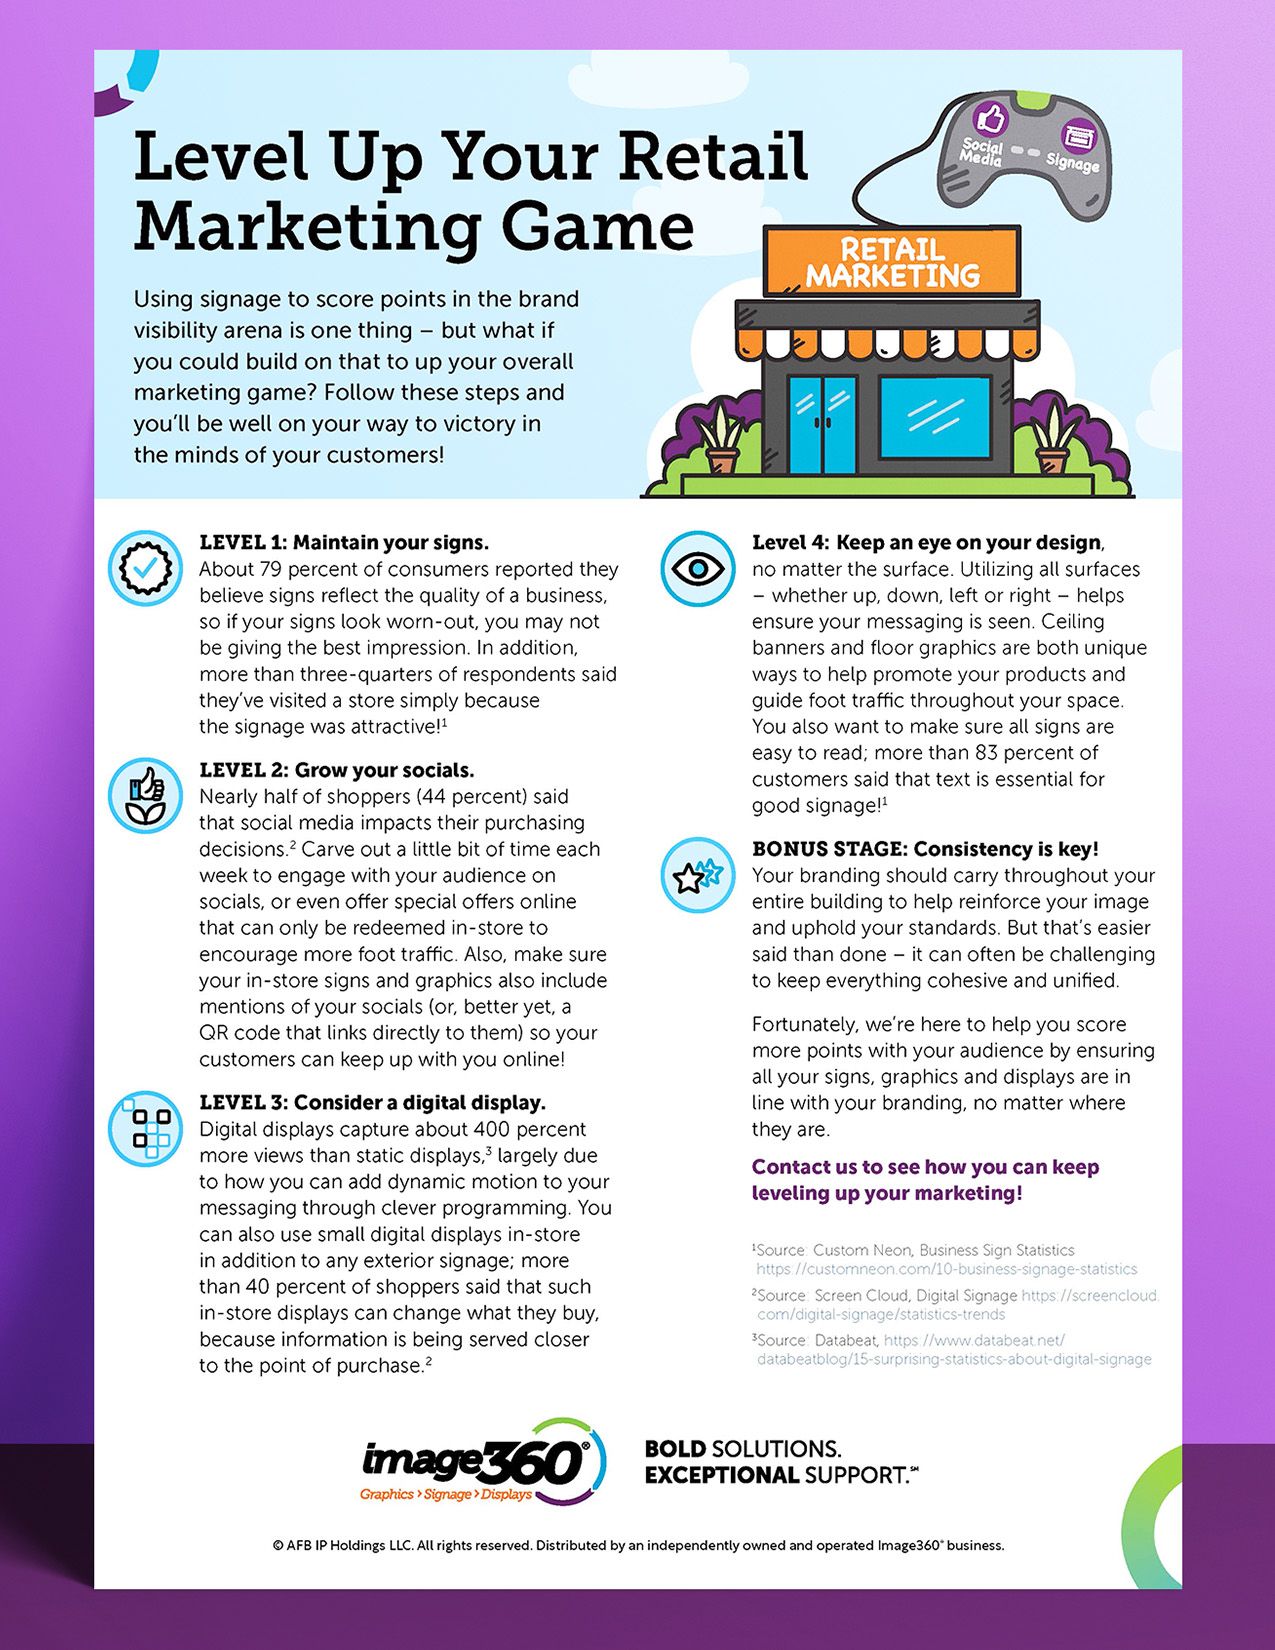 Image of level up your retail game infographic